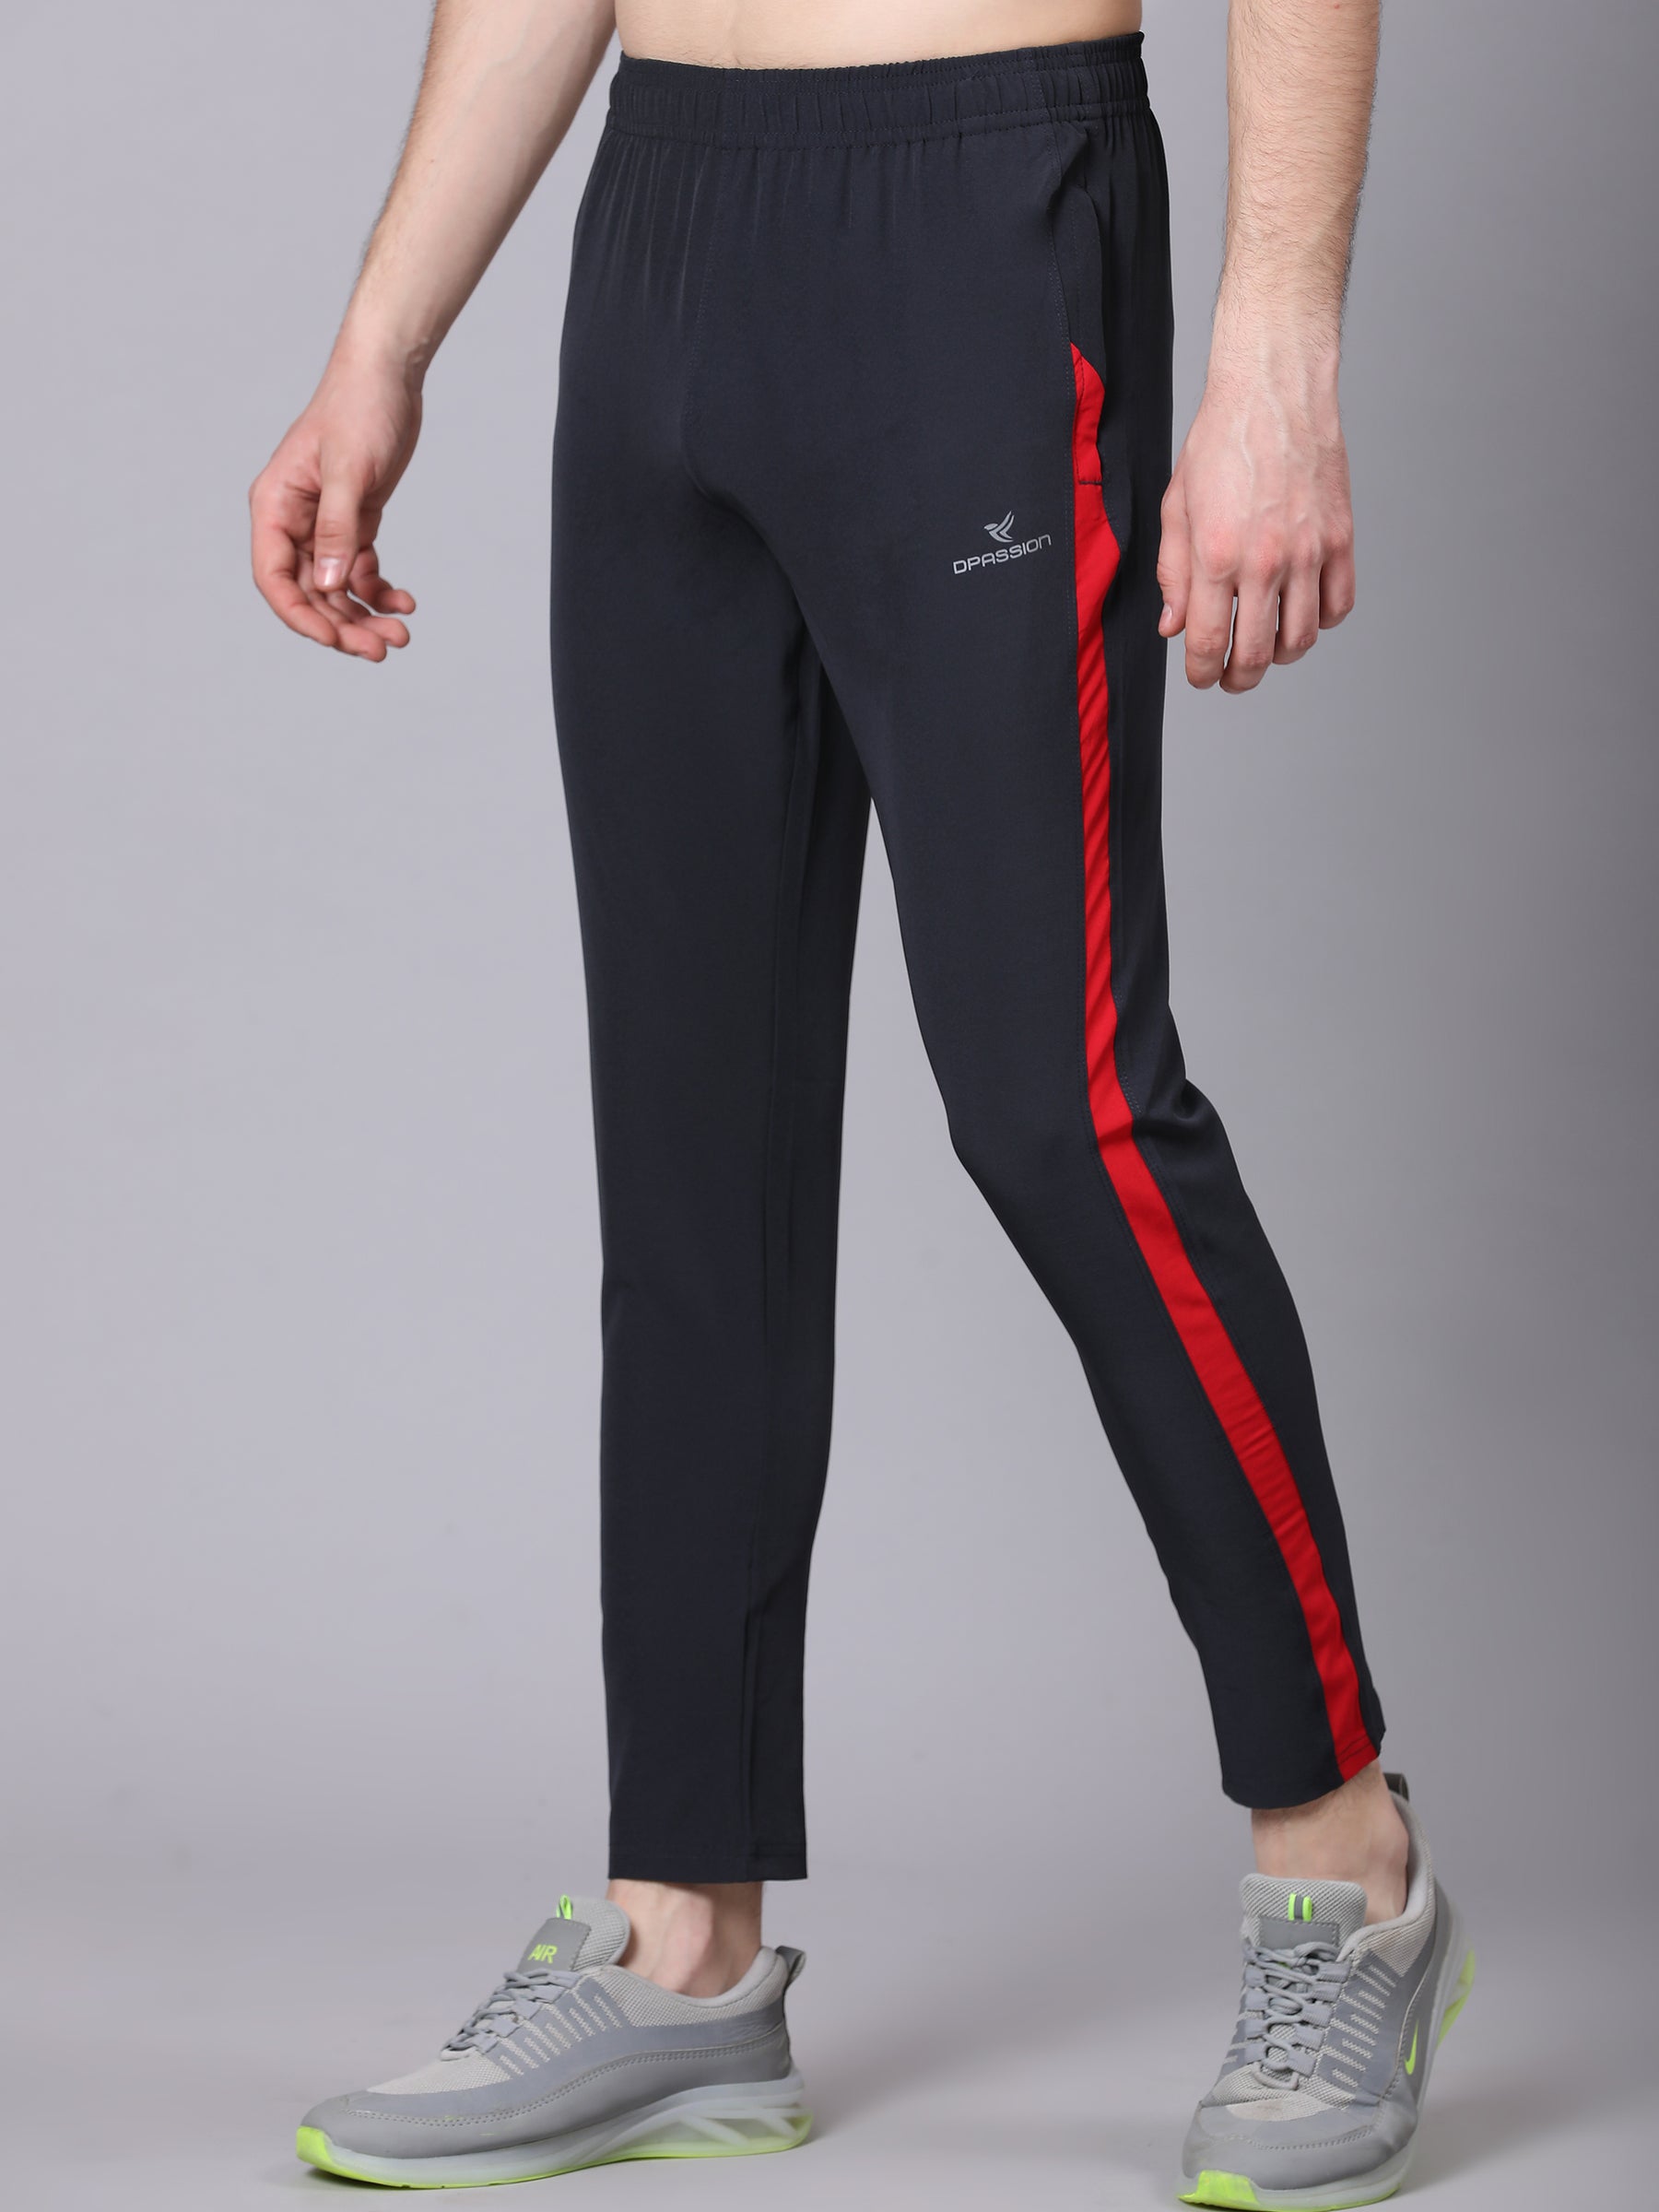 Mens Sports Track Pants in Warangal at best price by K K Tailors - Justdial